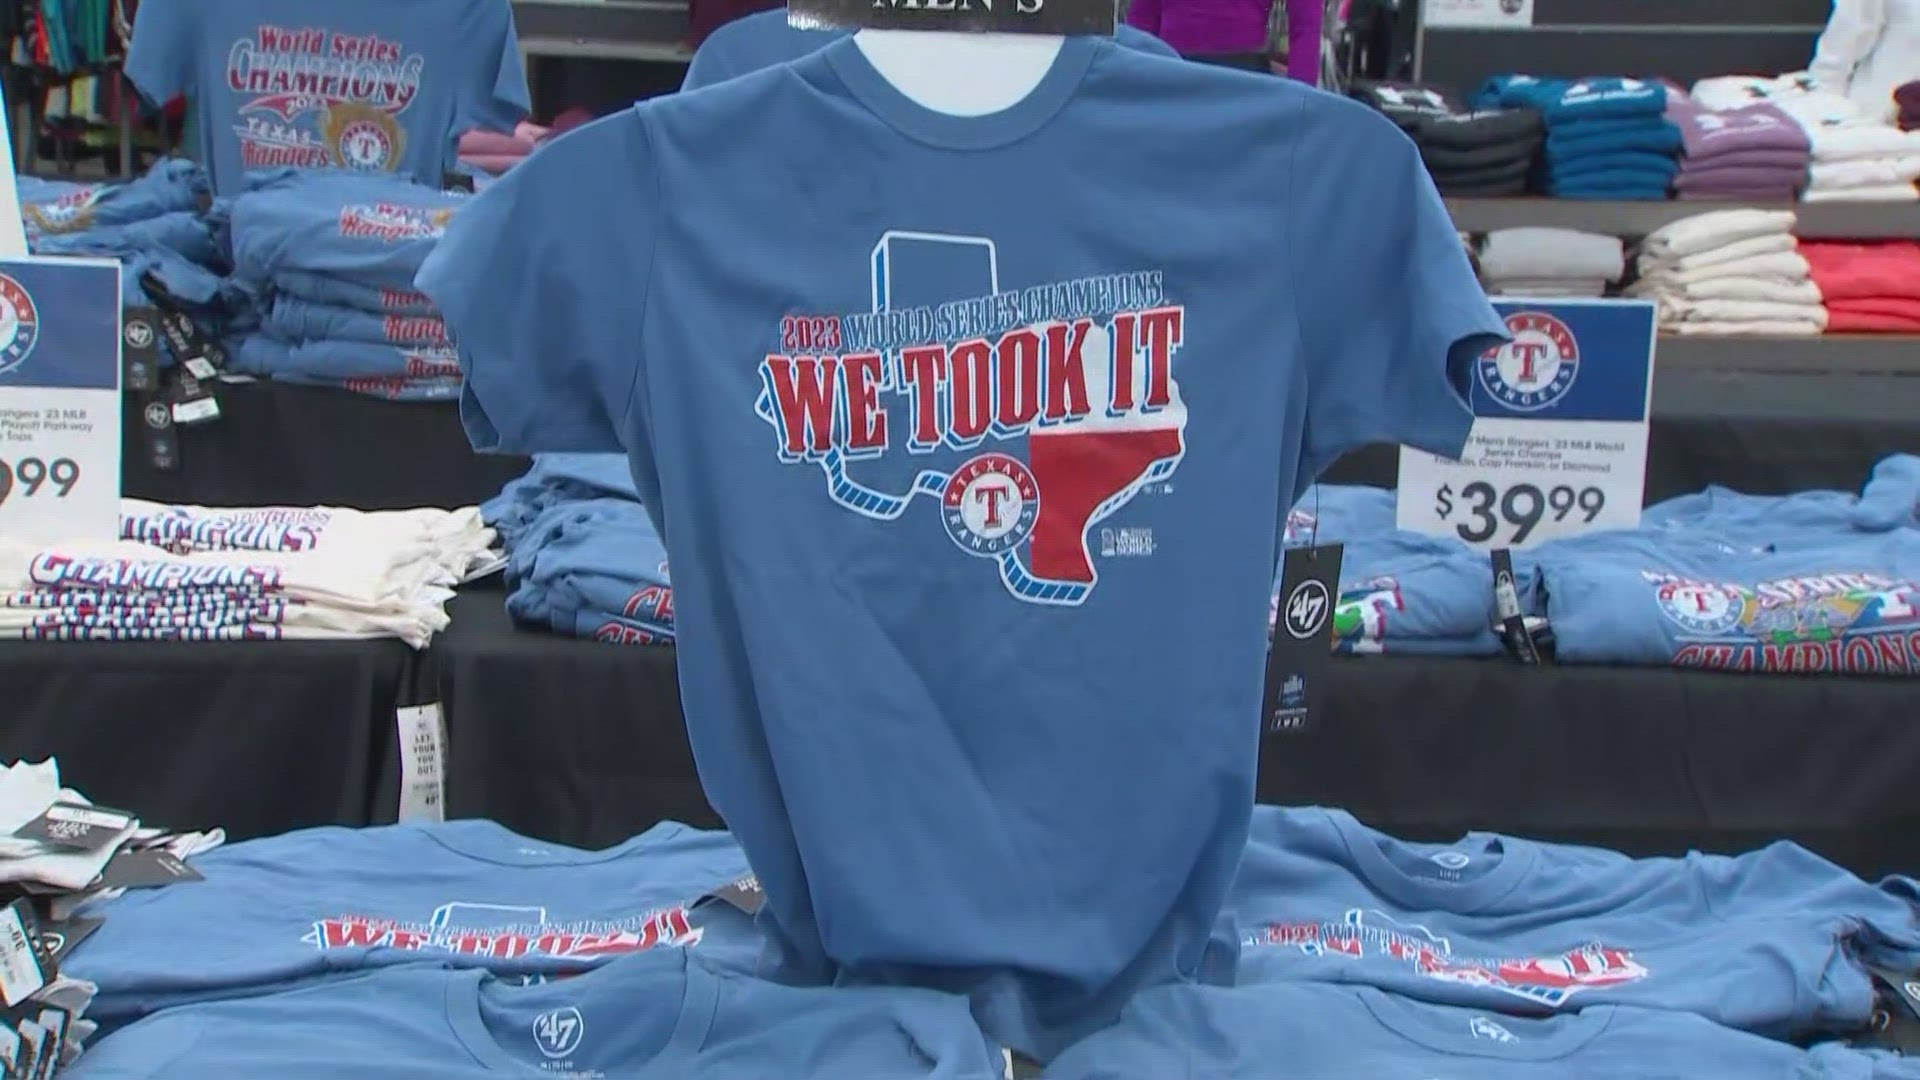 Stores stayed opened late Wednesday night after the Rangers clinched their first-ever World Series title.